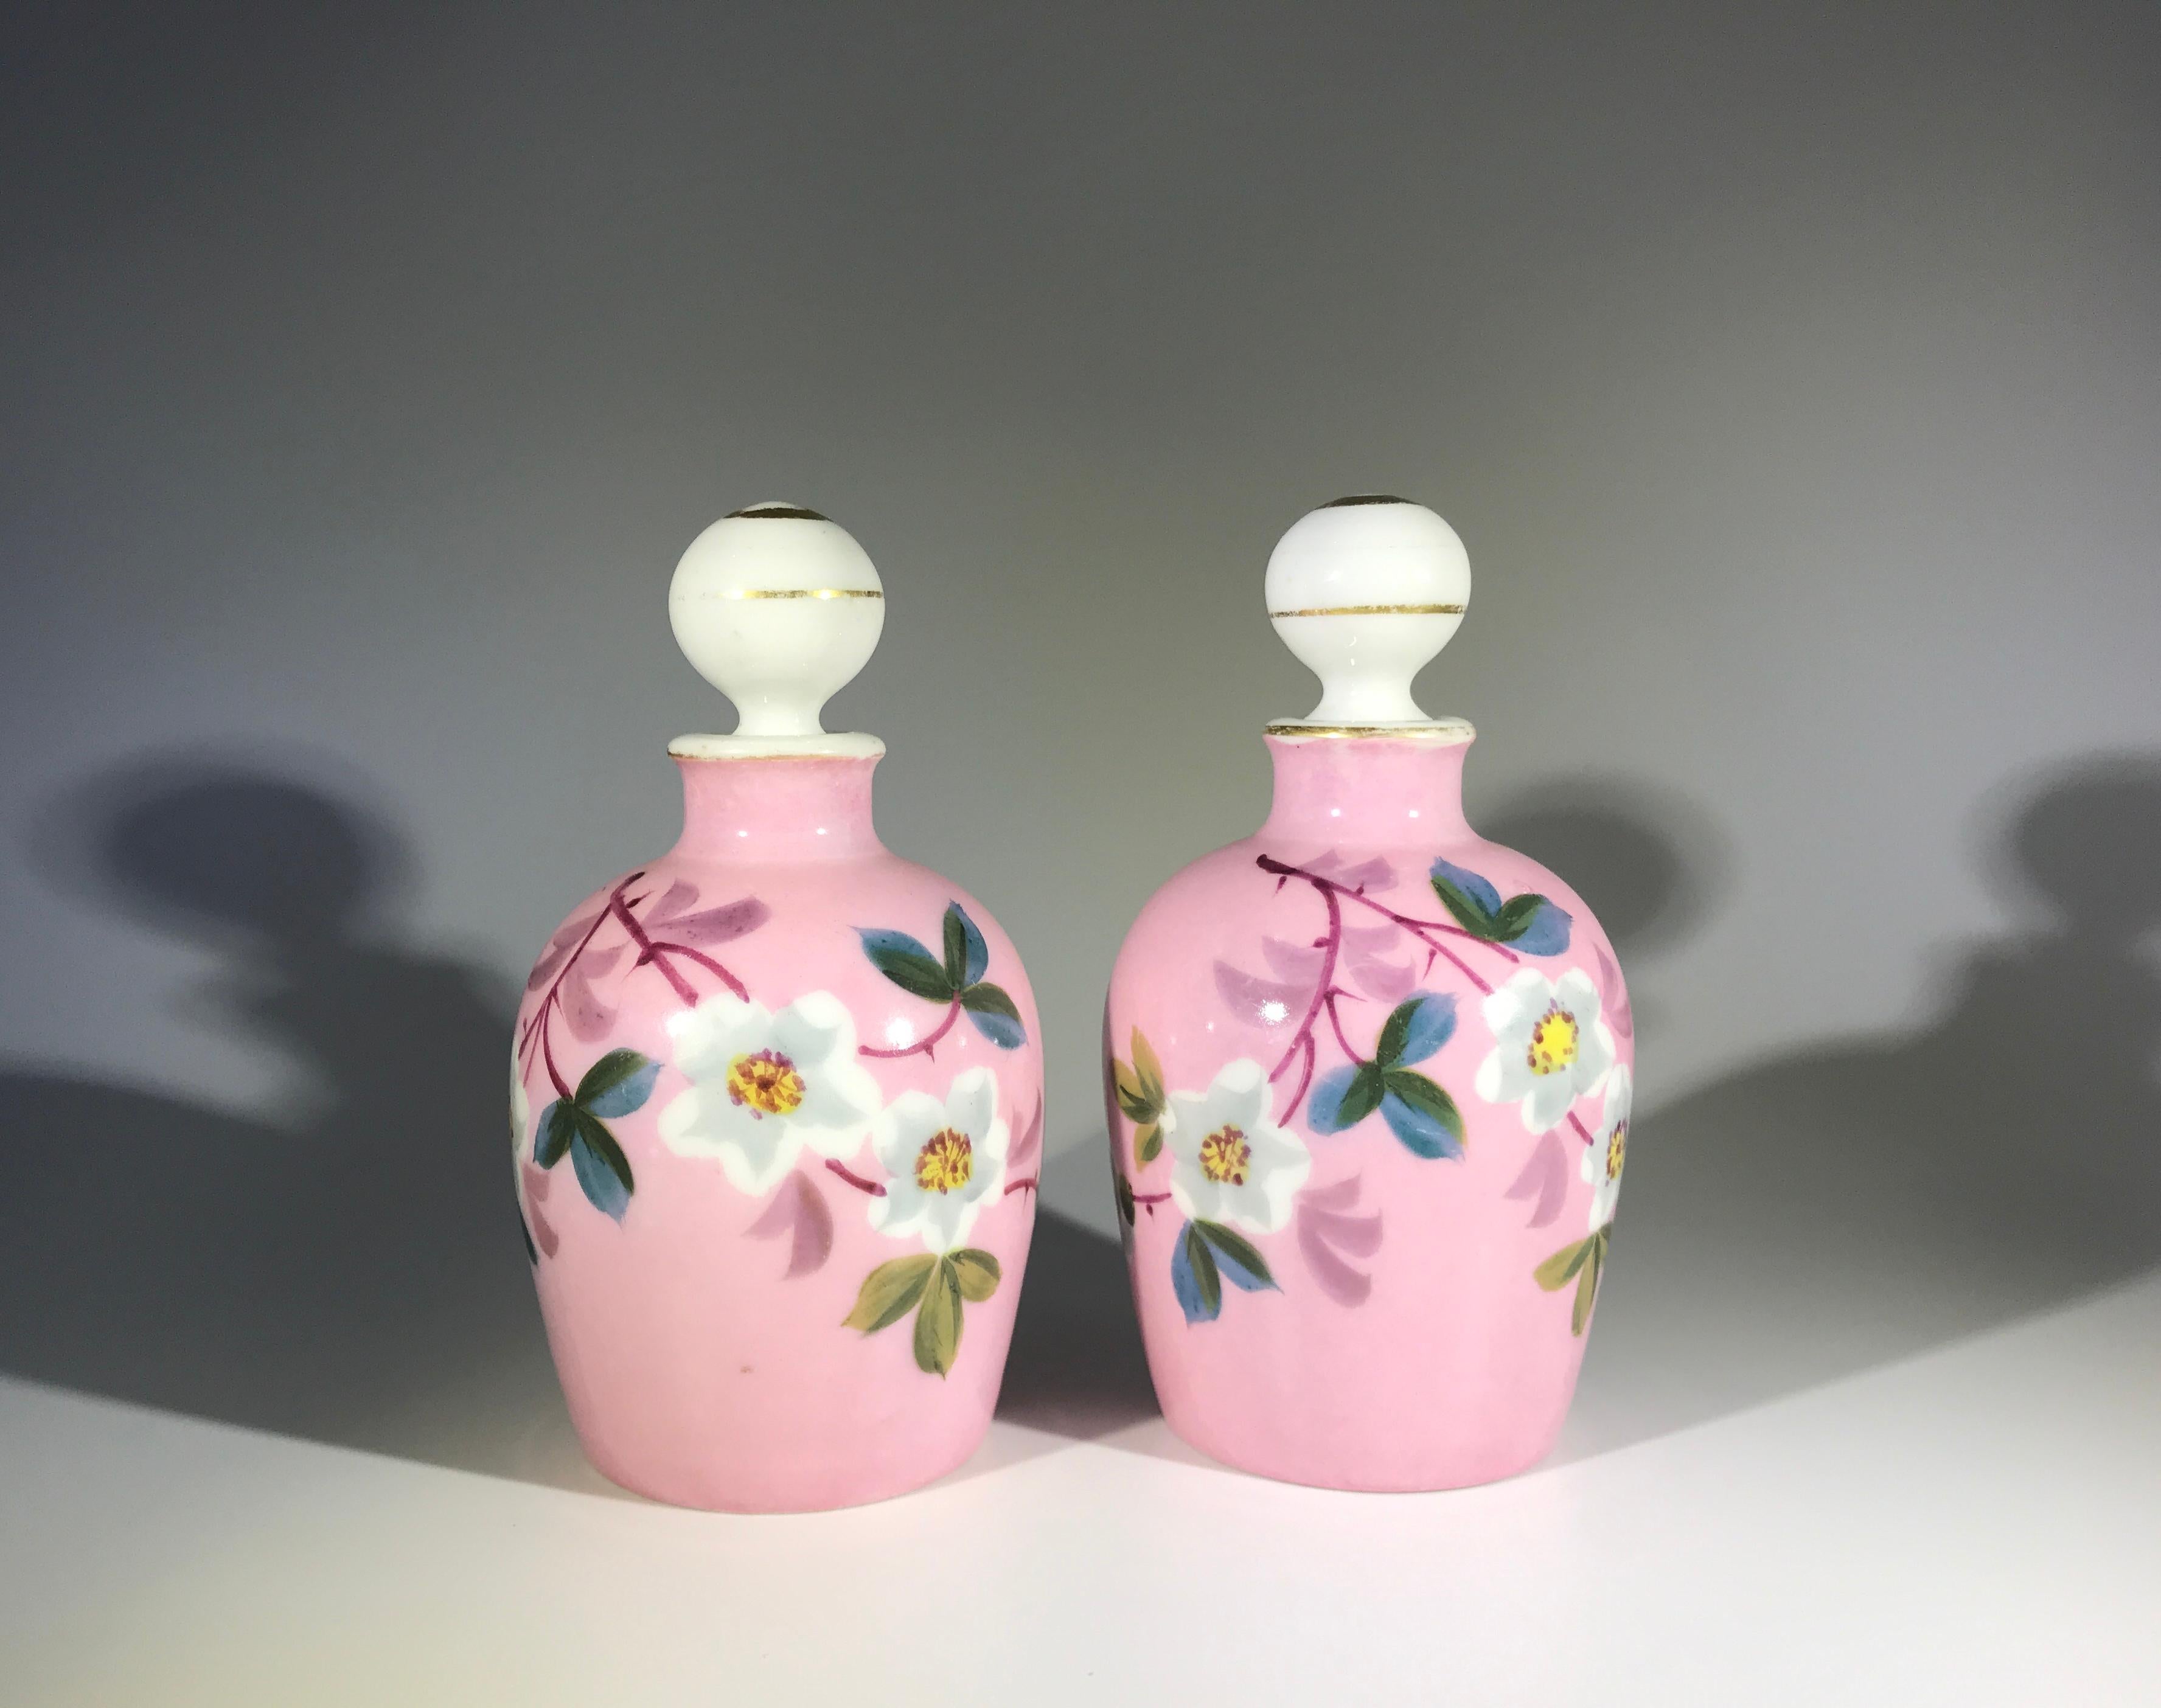 Charming pair of hand painted Charles Fields Haviland, Limoges antique porcelain perfume bottles, dating from the 19th century
Decorated with white cherry blossom flowers on a delicate pink background
The stoppers are white with gilded